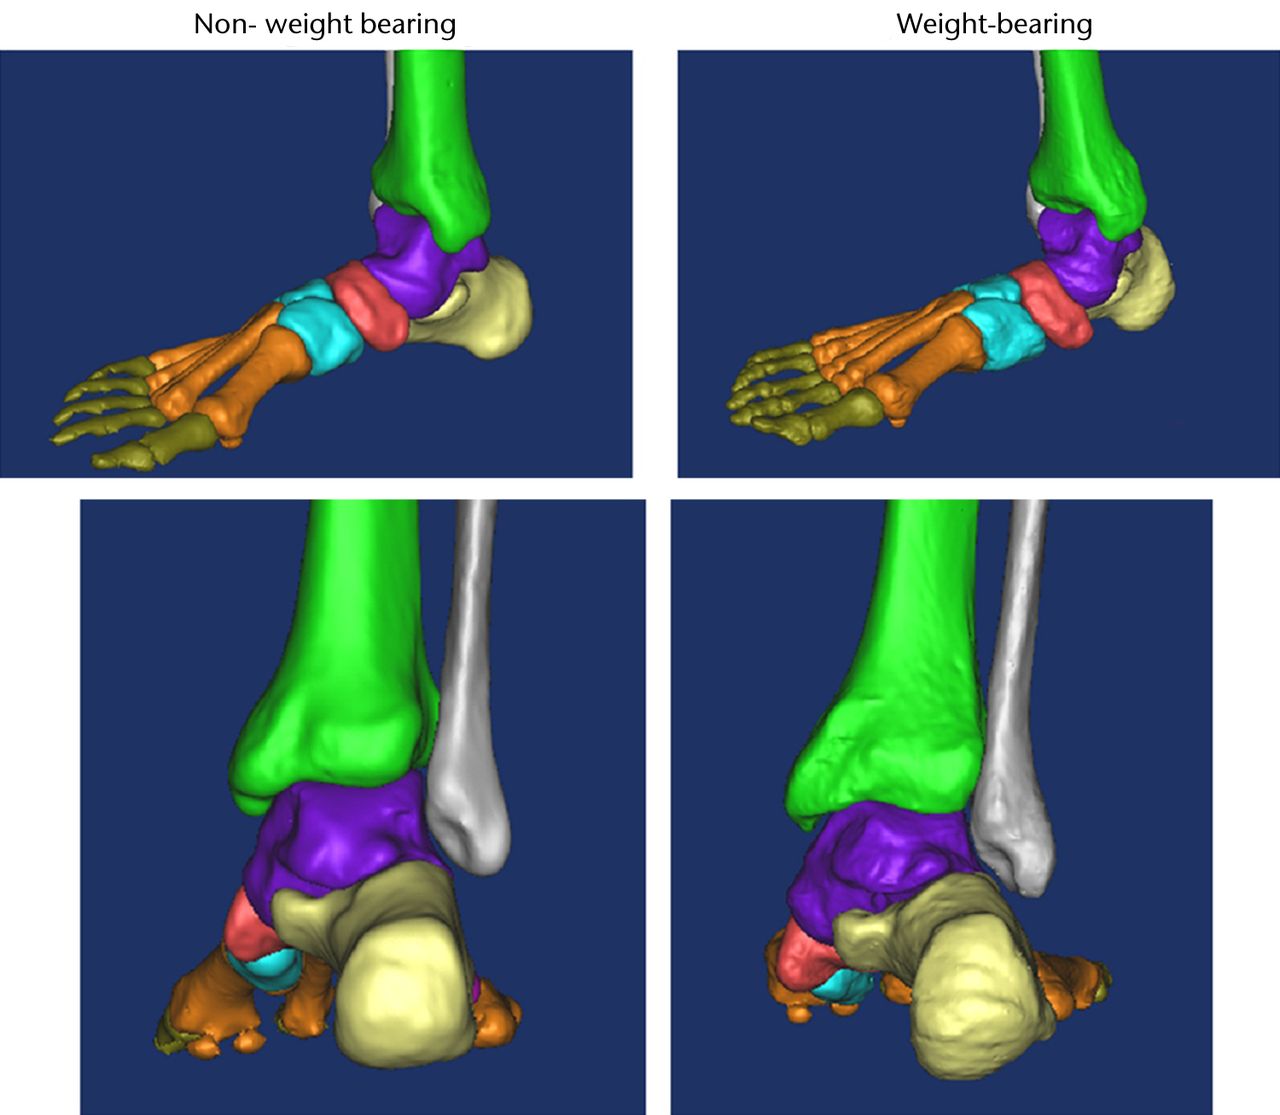 Fig. 9 
          Lateral (top) and posterior (bottom)
three-dimensional CT images of a stage II posterior tibial tendon
dysfunction (PTTD) flatfoot subject’s right foot under non-weight-bearing
(left) and full-body-weight-bearing (right).
        